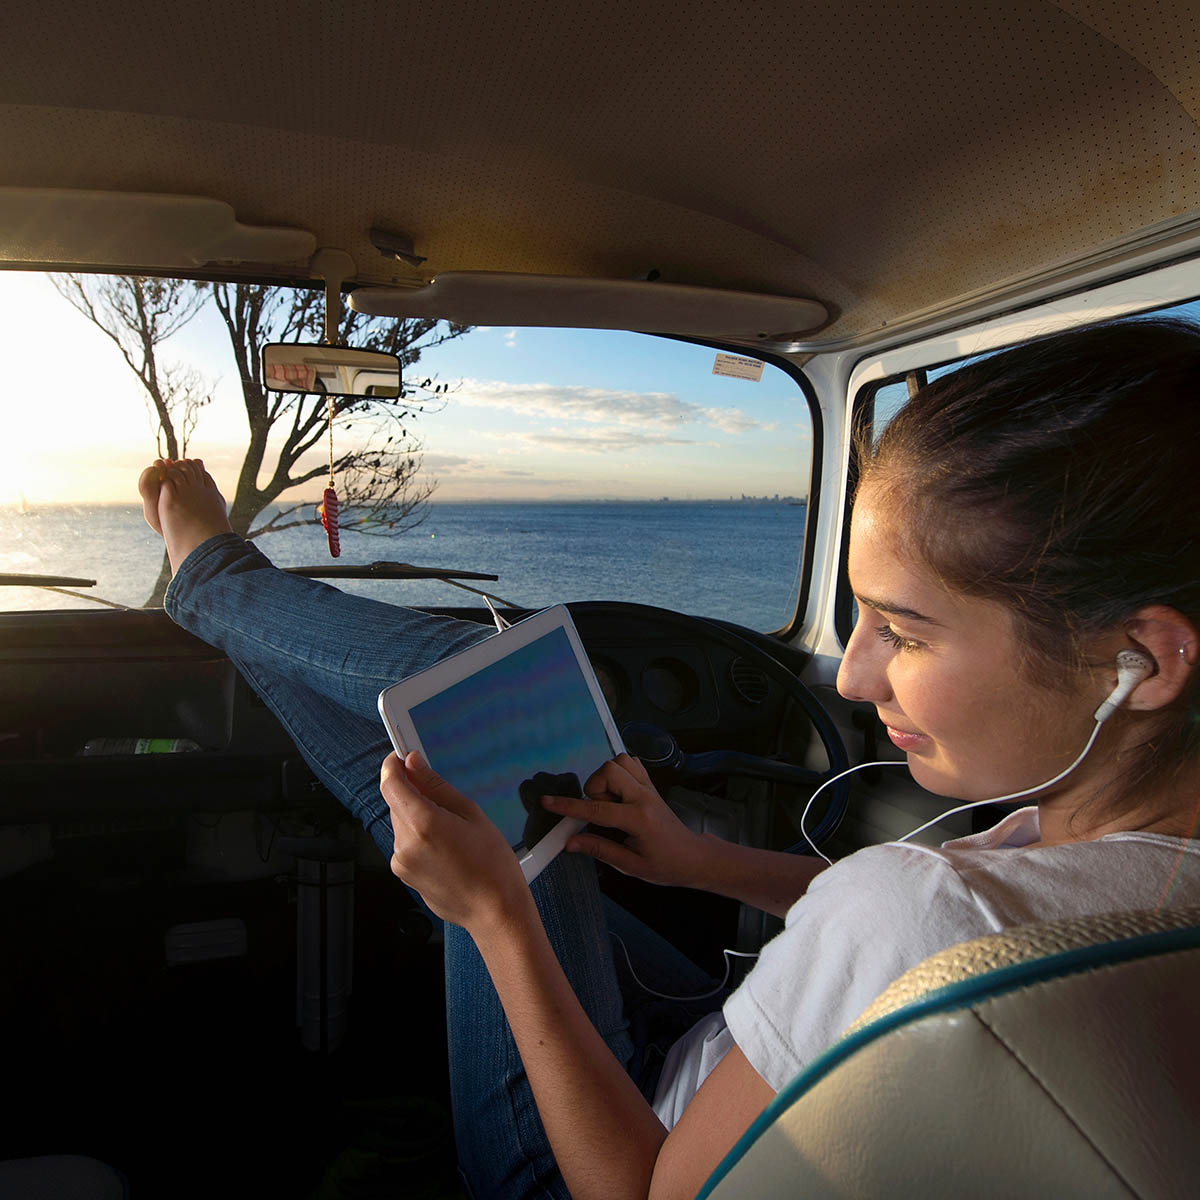 Girl with feet up in car interacting with tablet with ocean and sunset in the Background